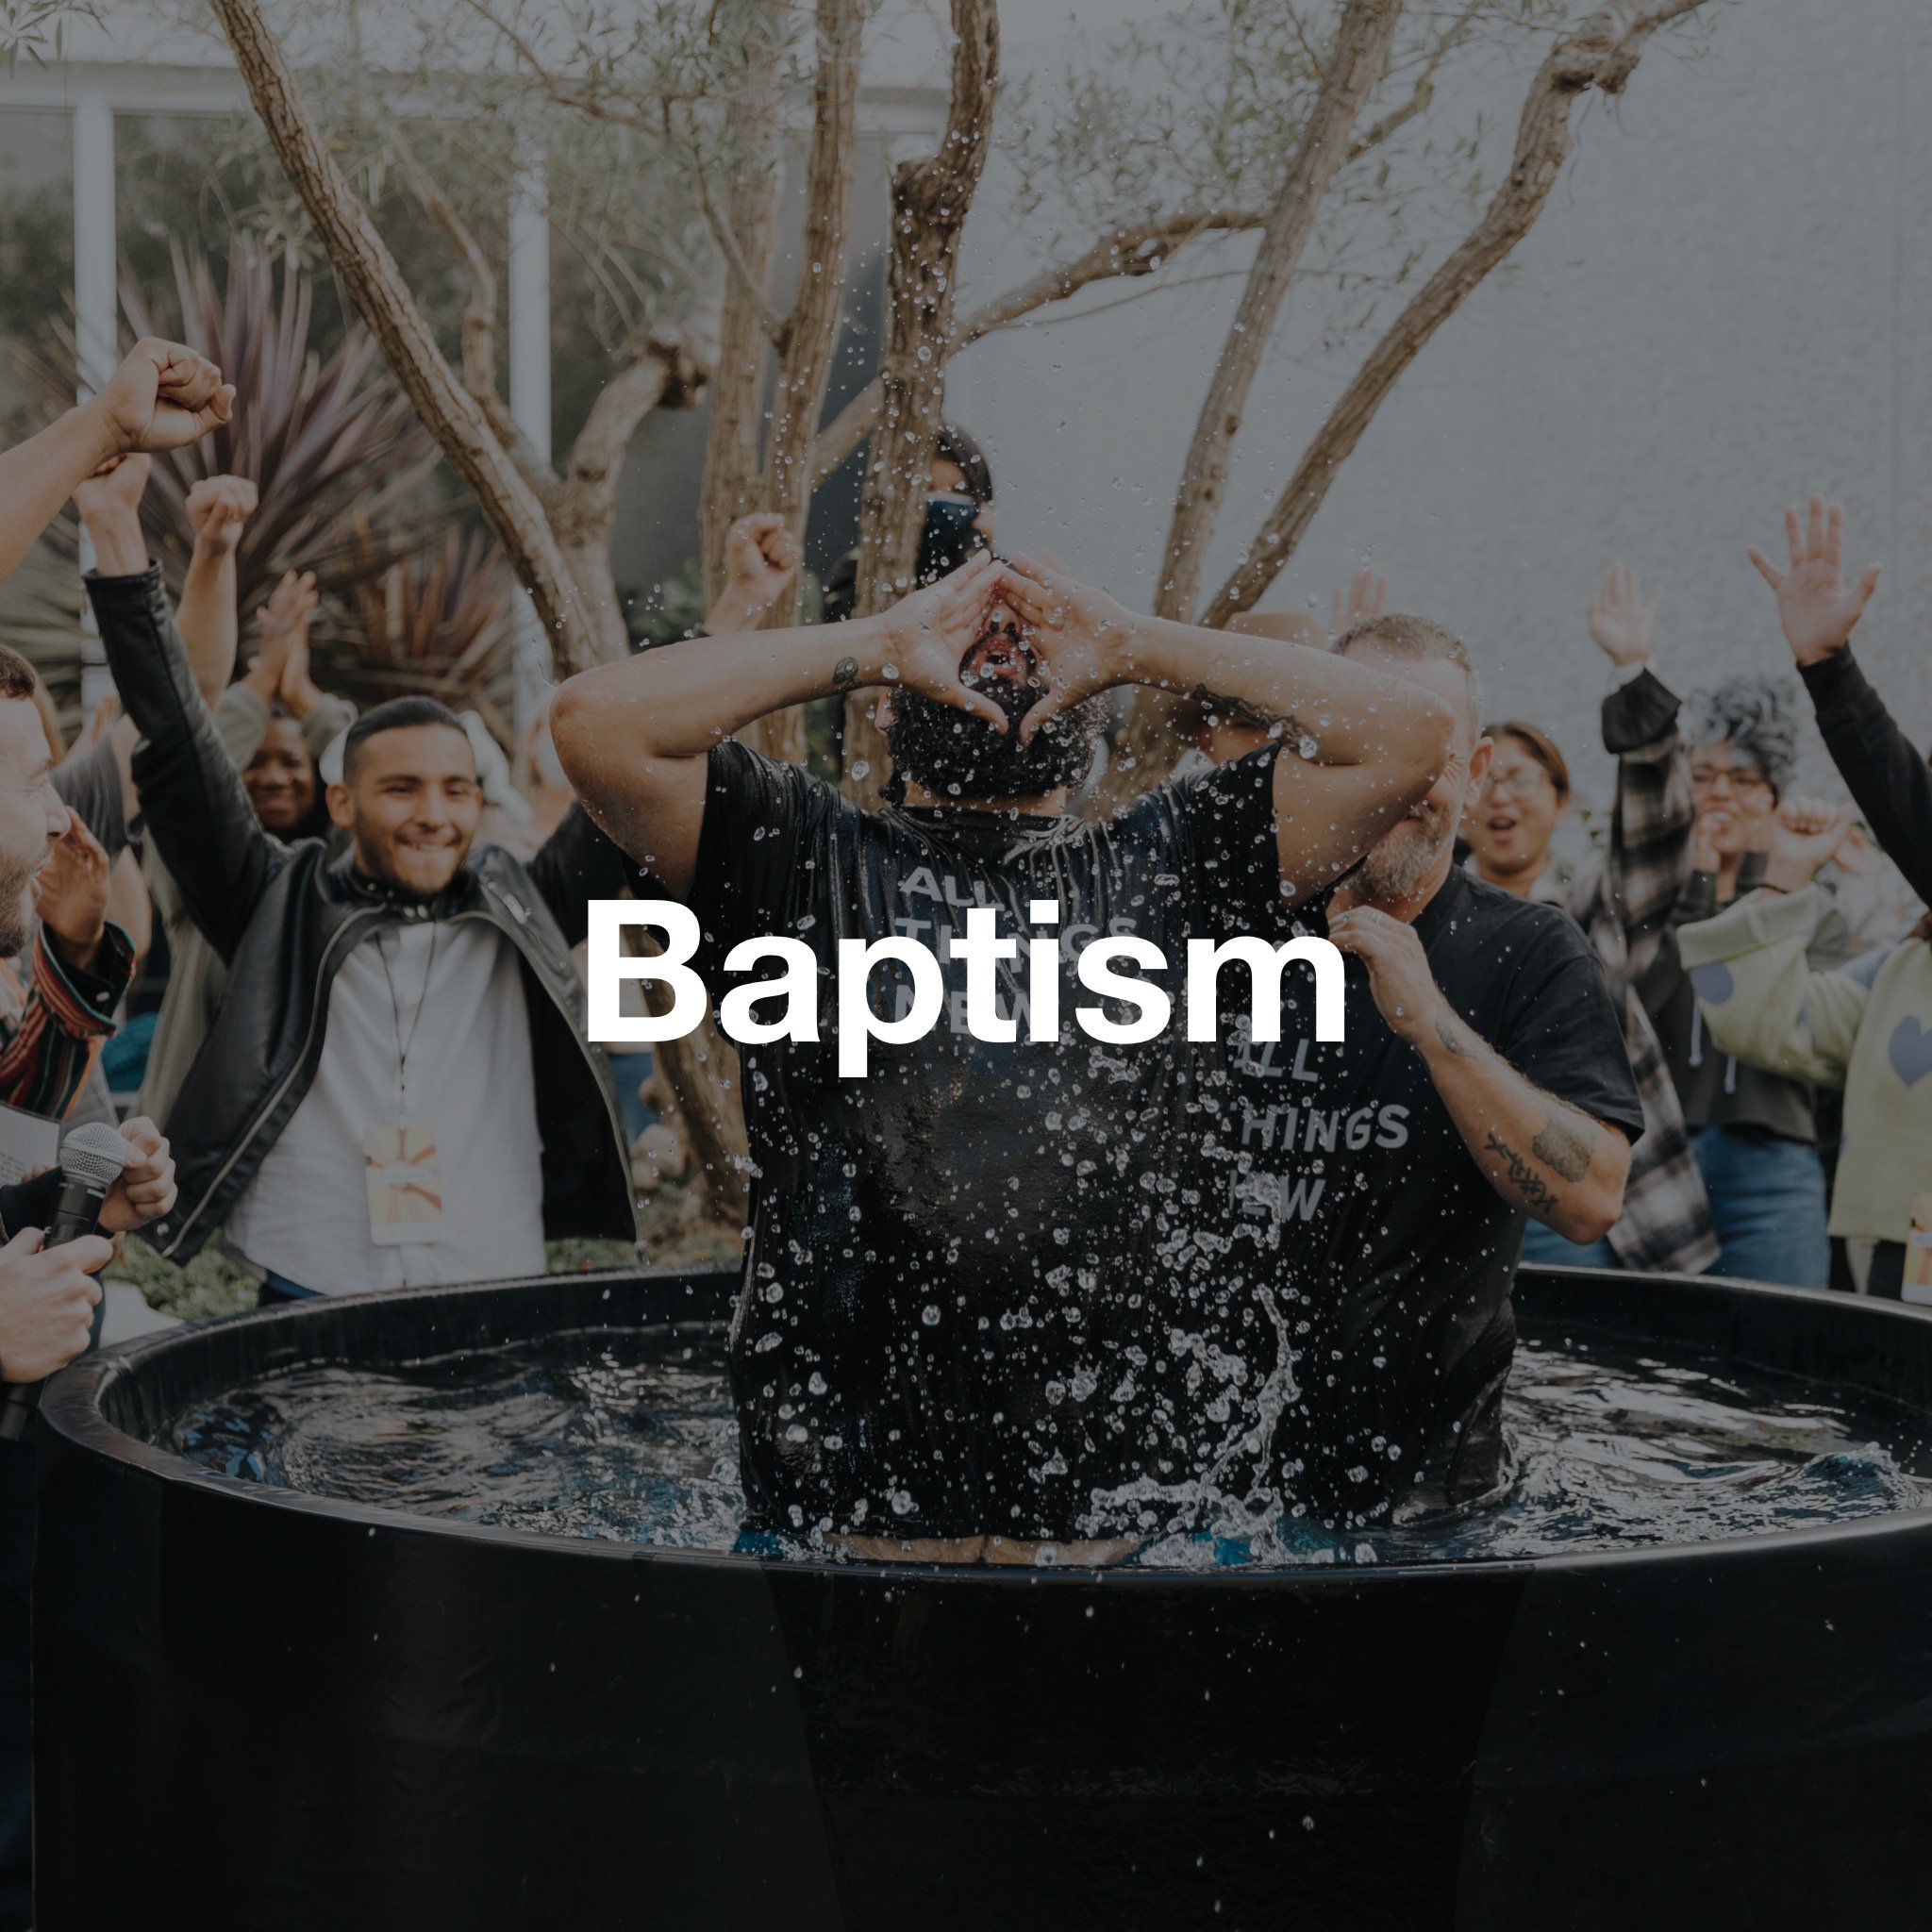 Join the Baptism Team